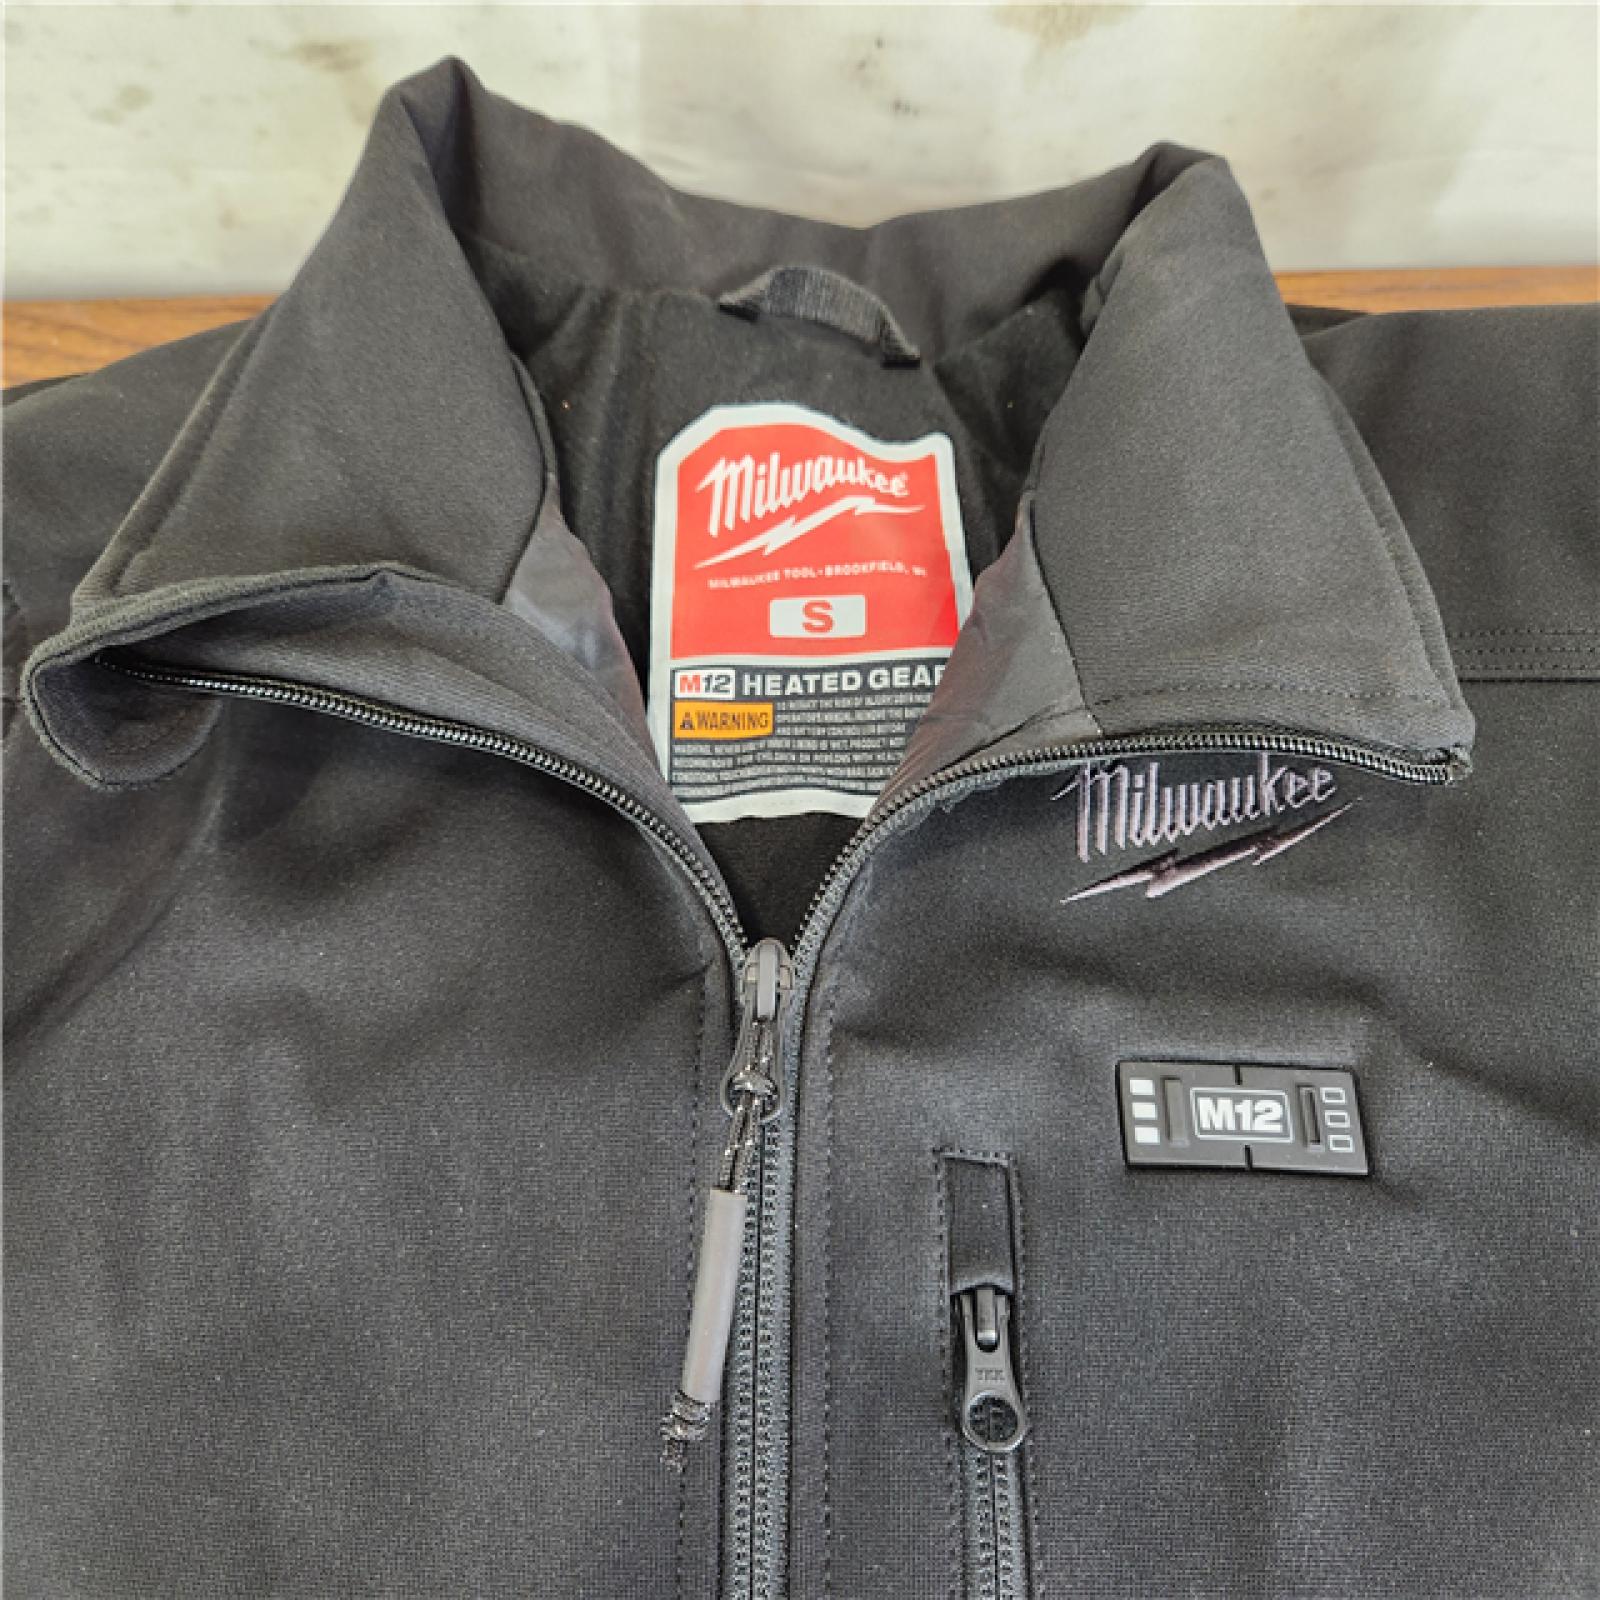 AS-IS Milwaukee M12 12V Cordless TOUGHSHELL Black Heated Jacket (Jacket Only) (Small)